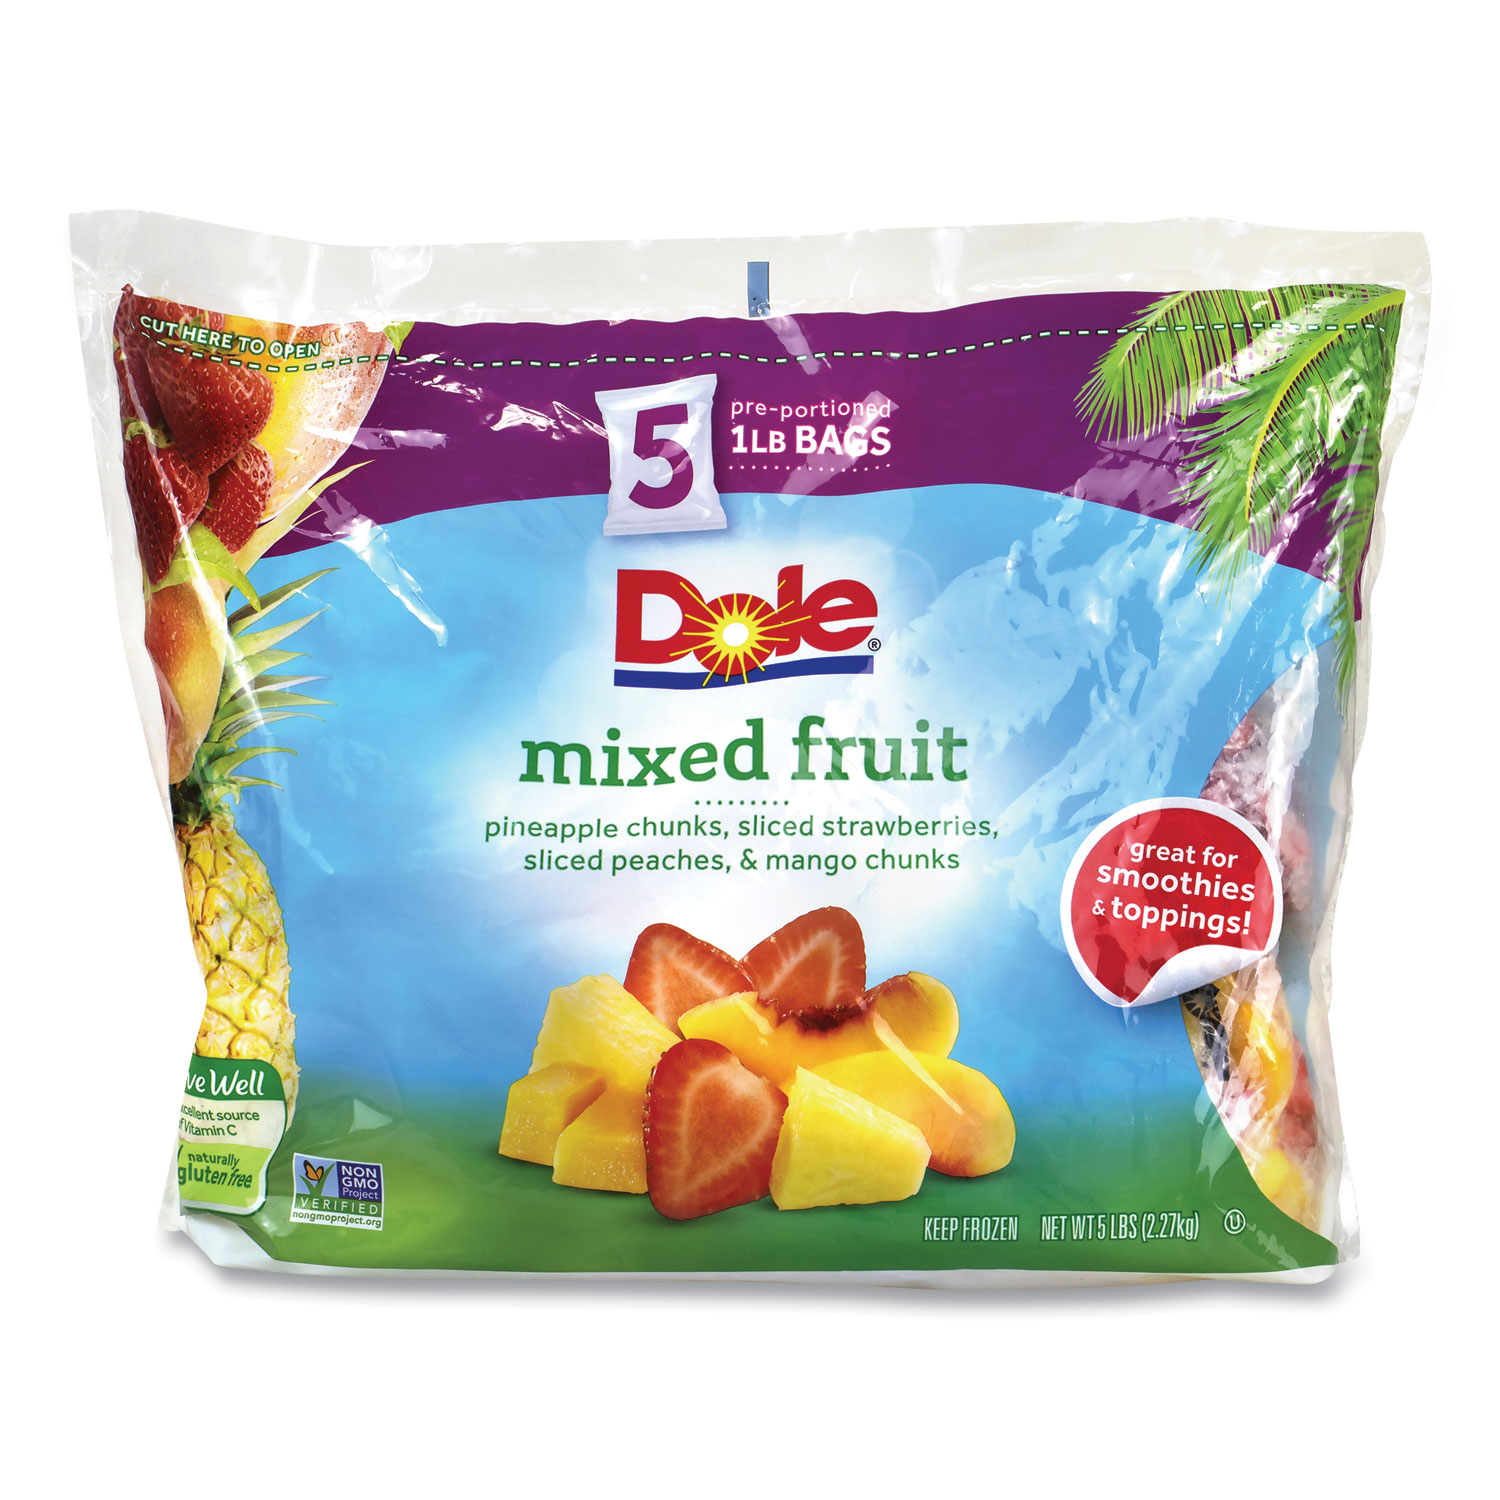  Dole 206577 Frozen Mixed Fruit, 1 lb Bag, 5 Bags/Pack, Free Delivery in 1-4 Business Days (GRR90300102) 